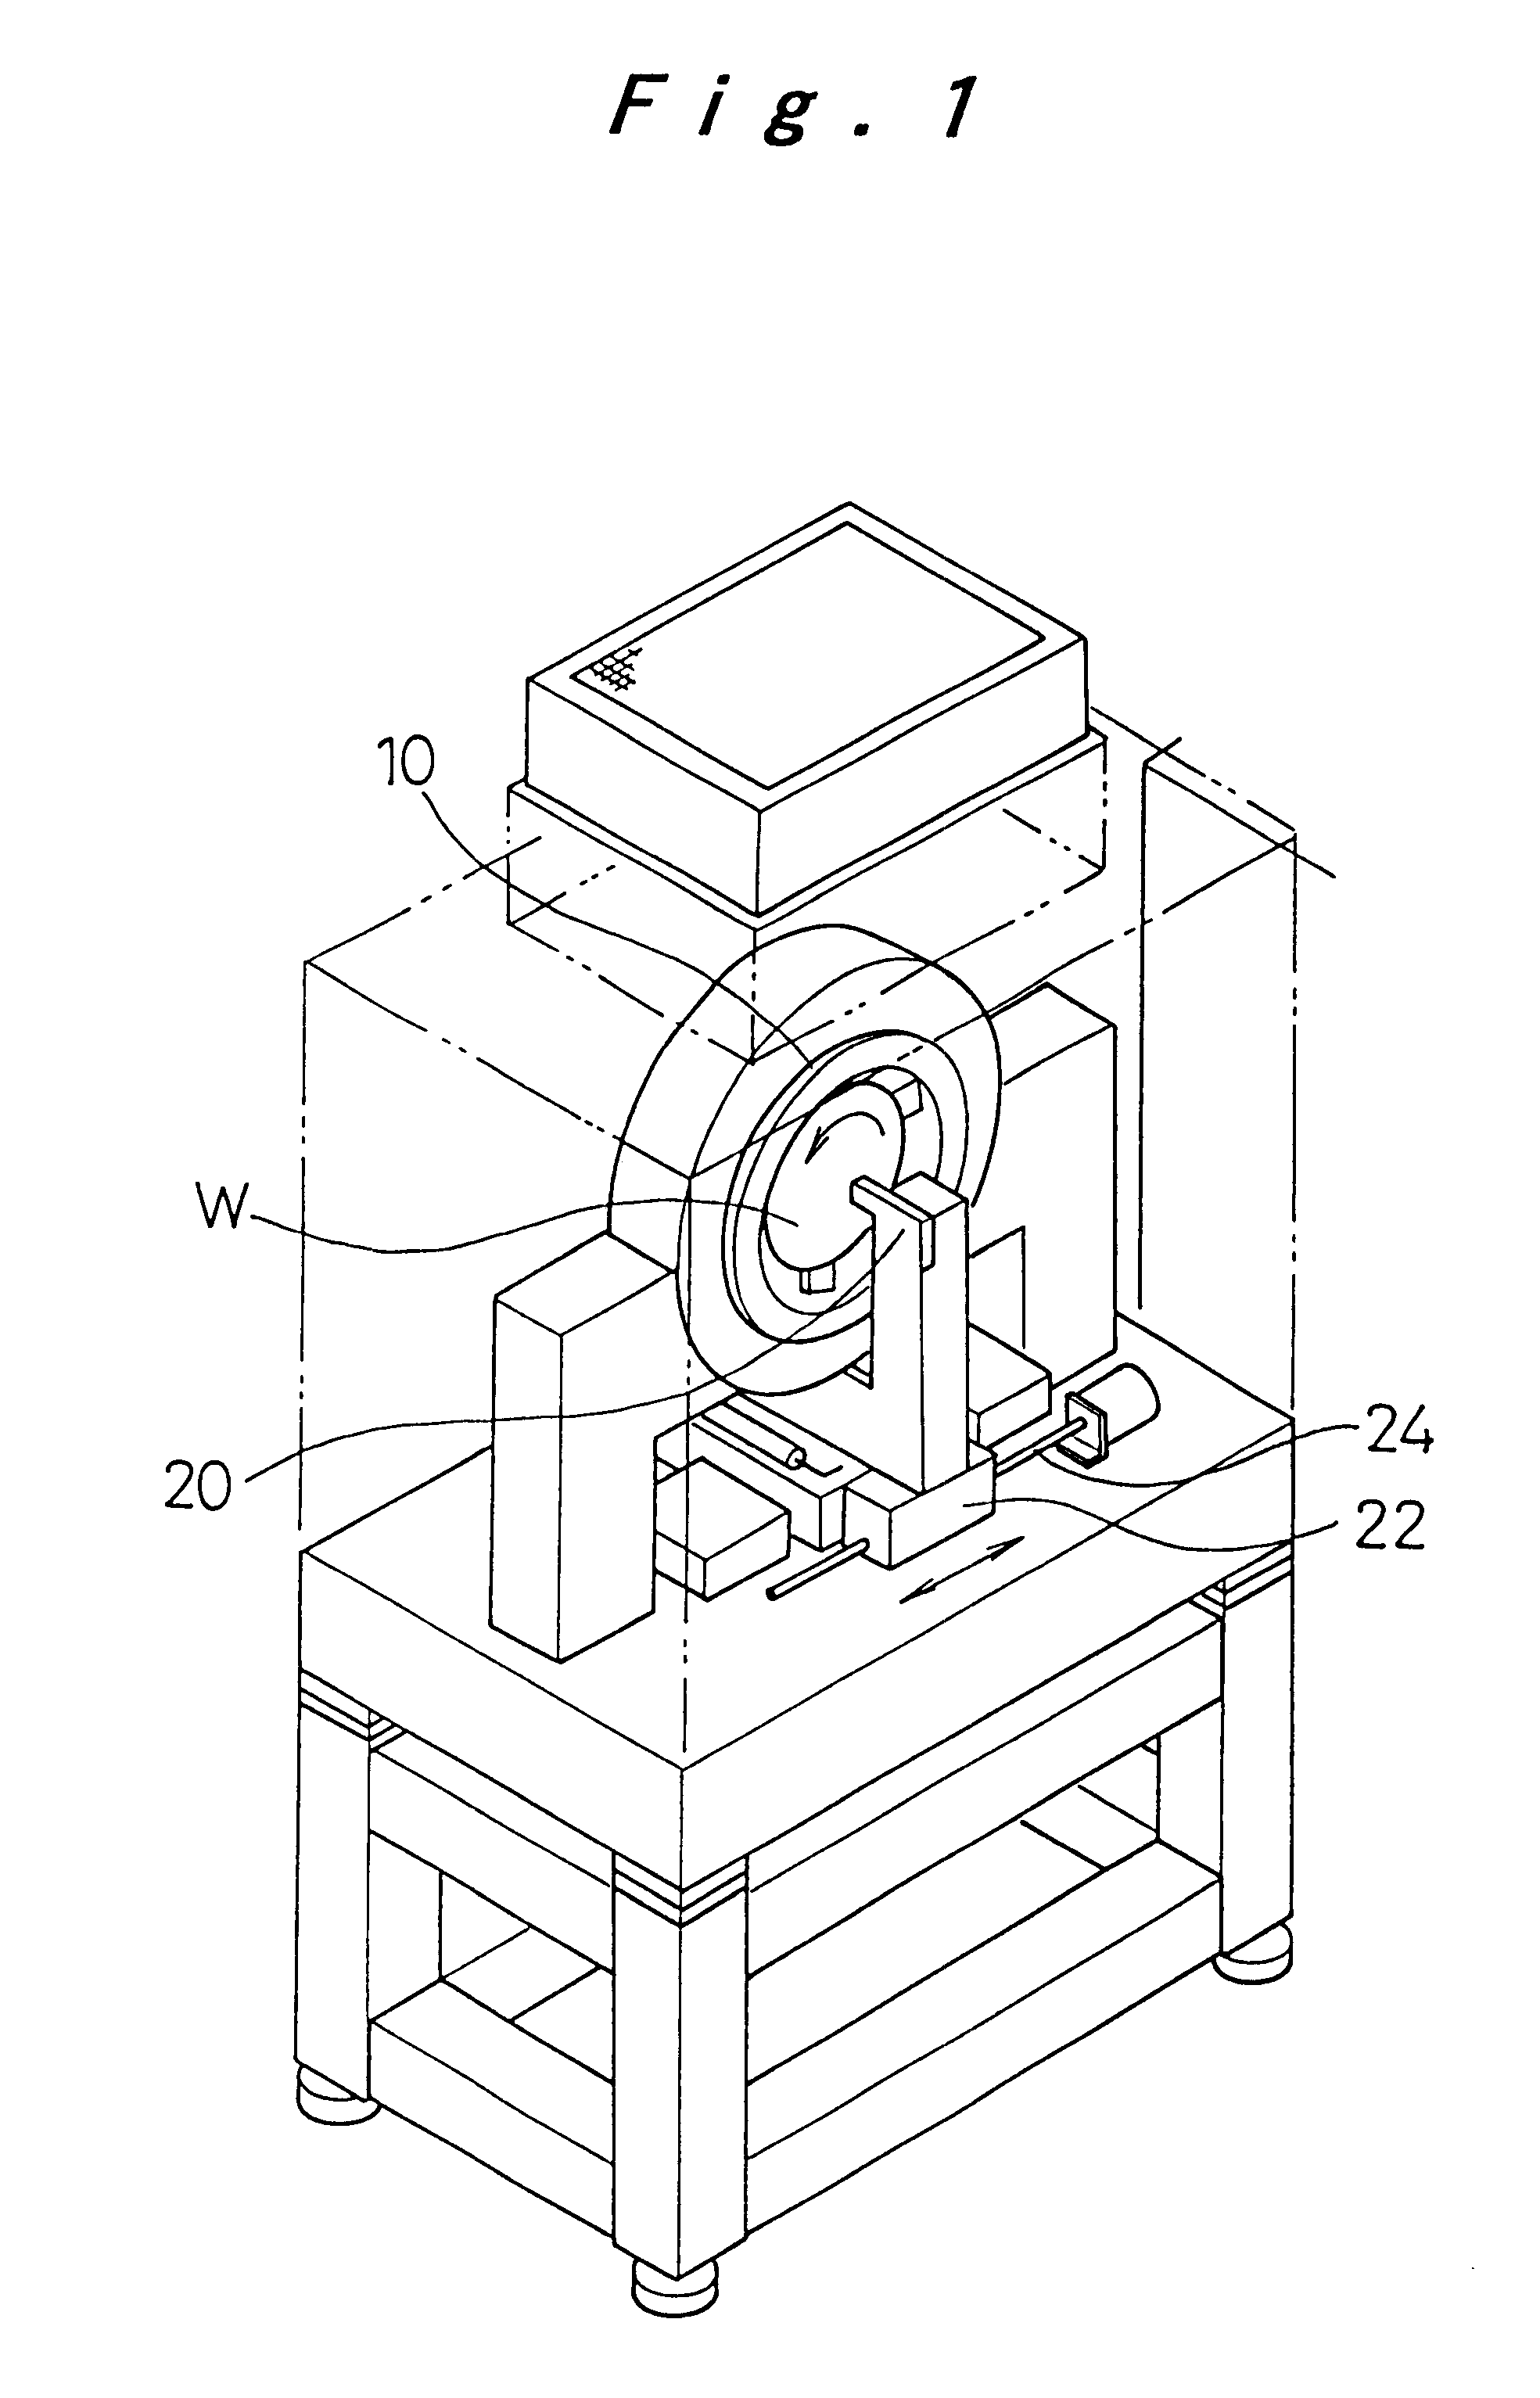 Method and apparatus for measuring thickness variation of a thin sheet material, and probe reflector used in the apparatus